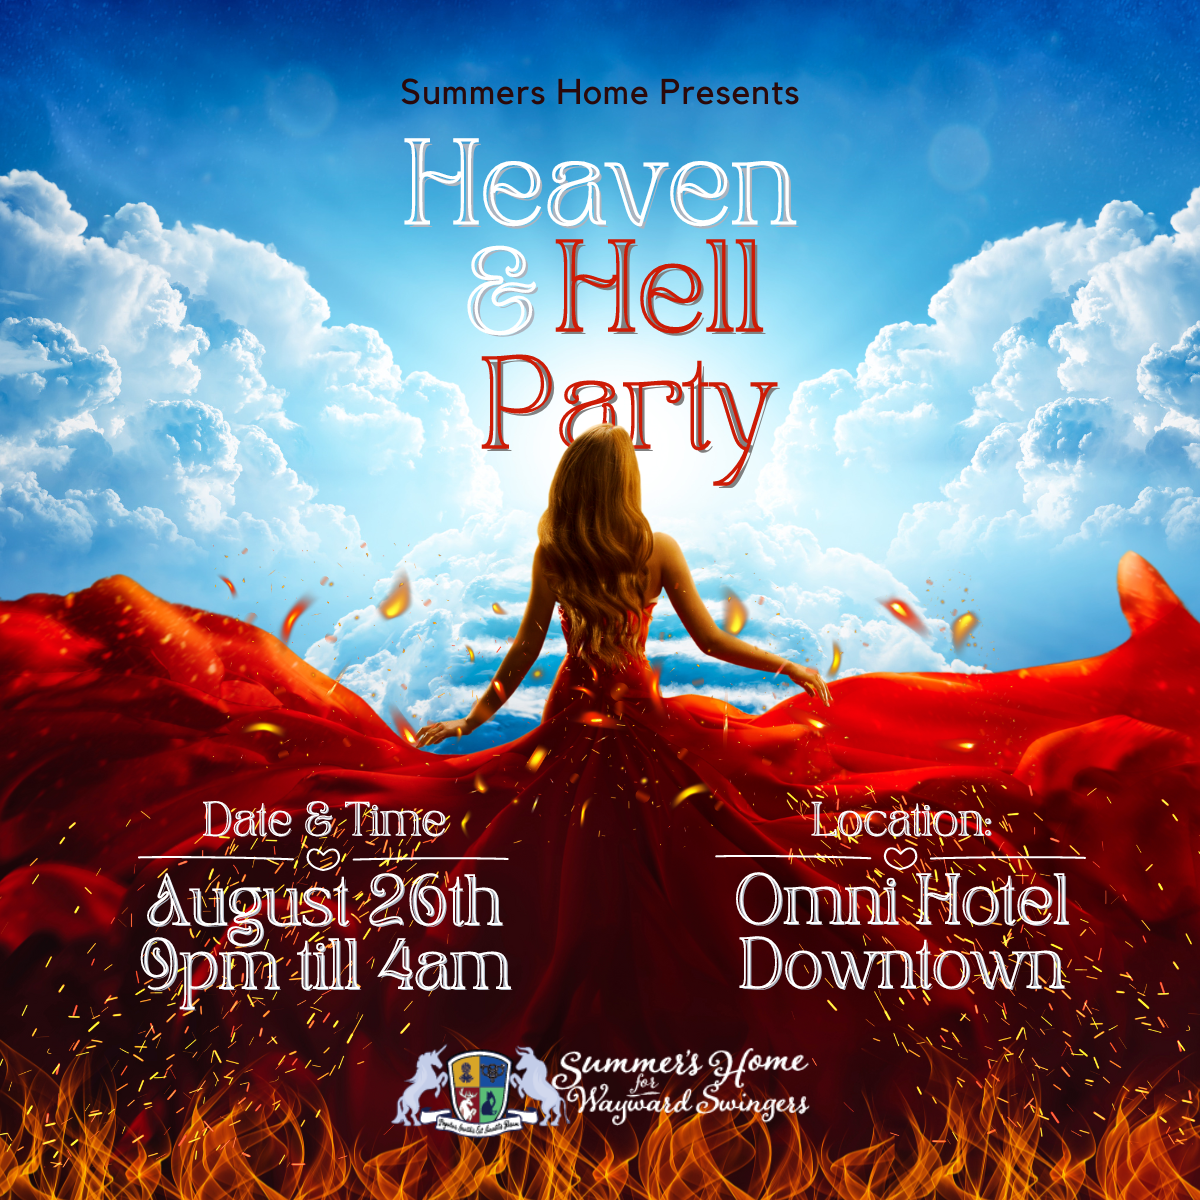 Heaven and Hell - A Sinfully Divine Affair!